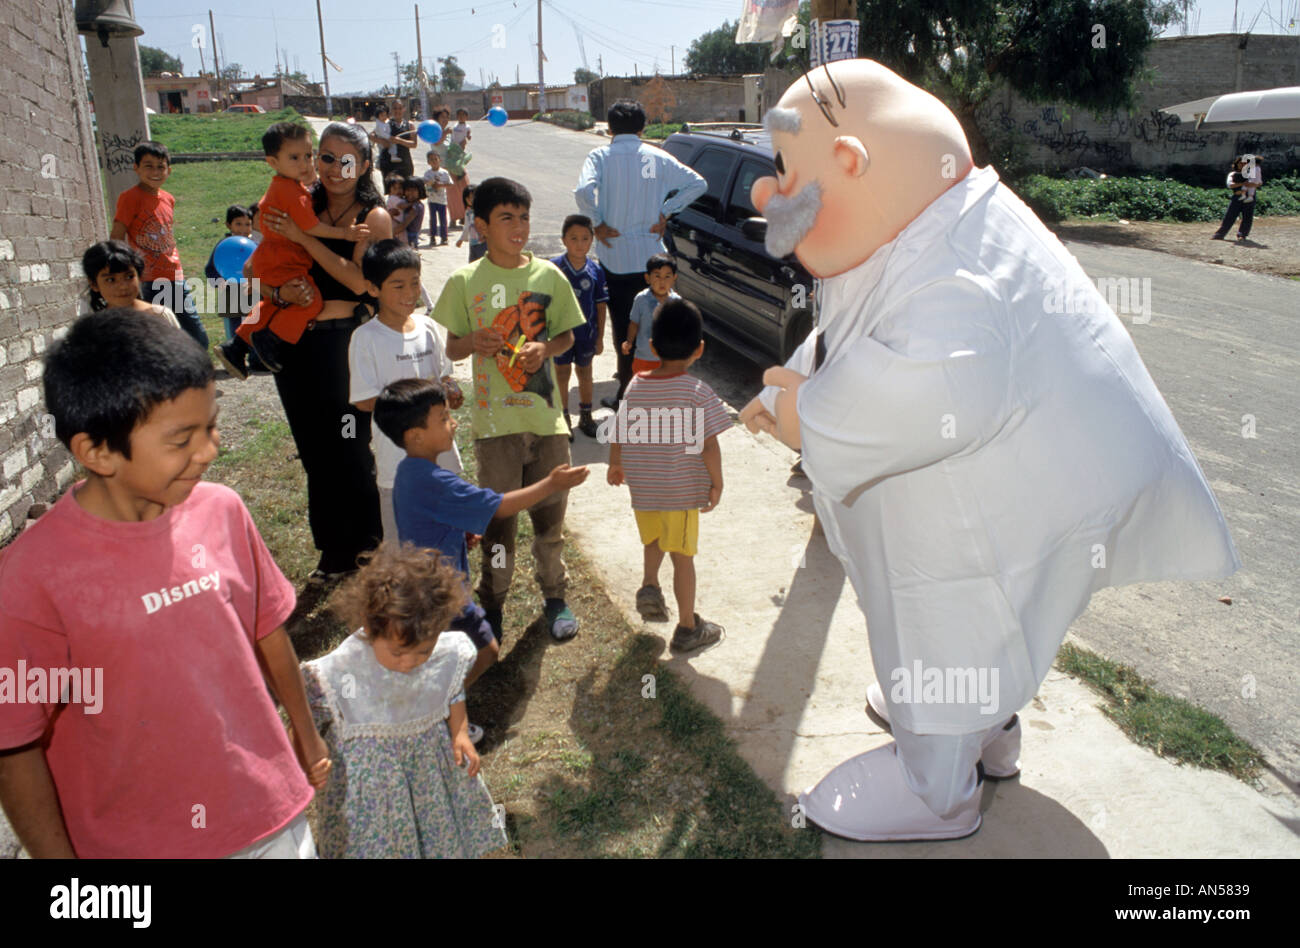 A promotional character for Farmacias Similares attracts children for a community based health care program outside Mexico City  Stock Photo